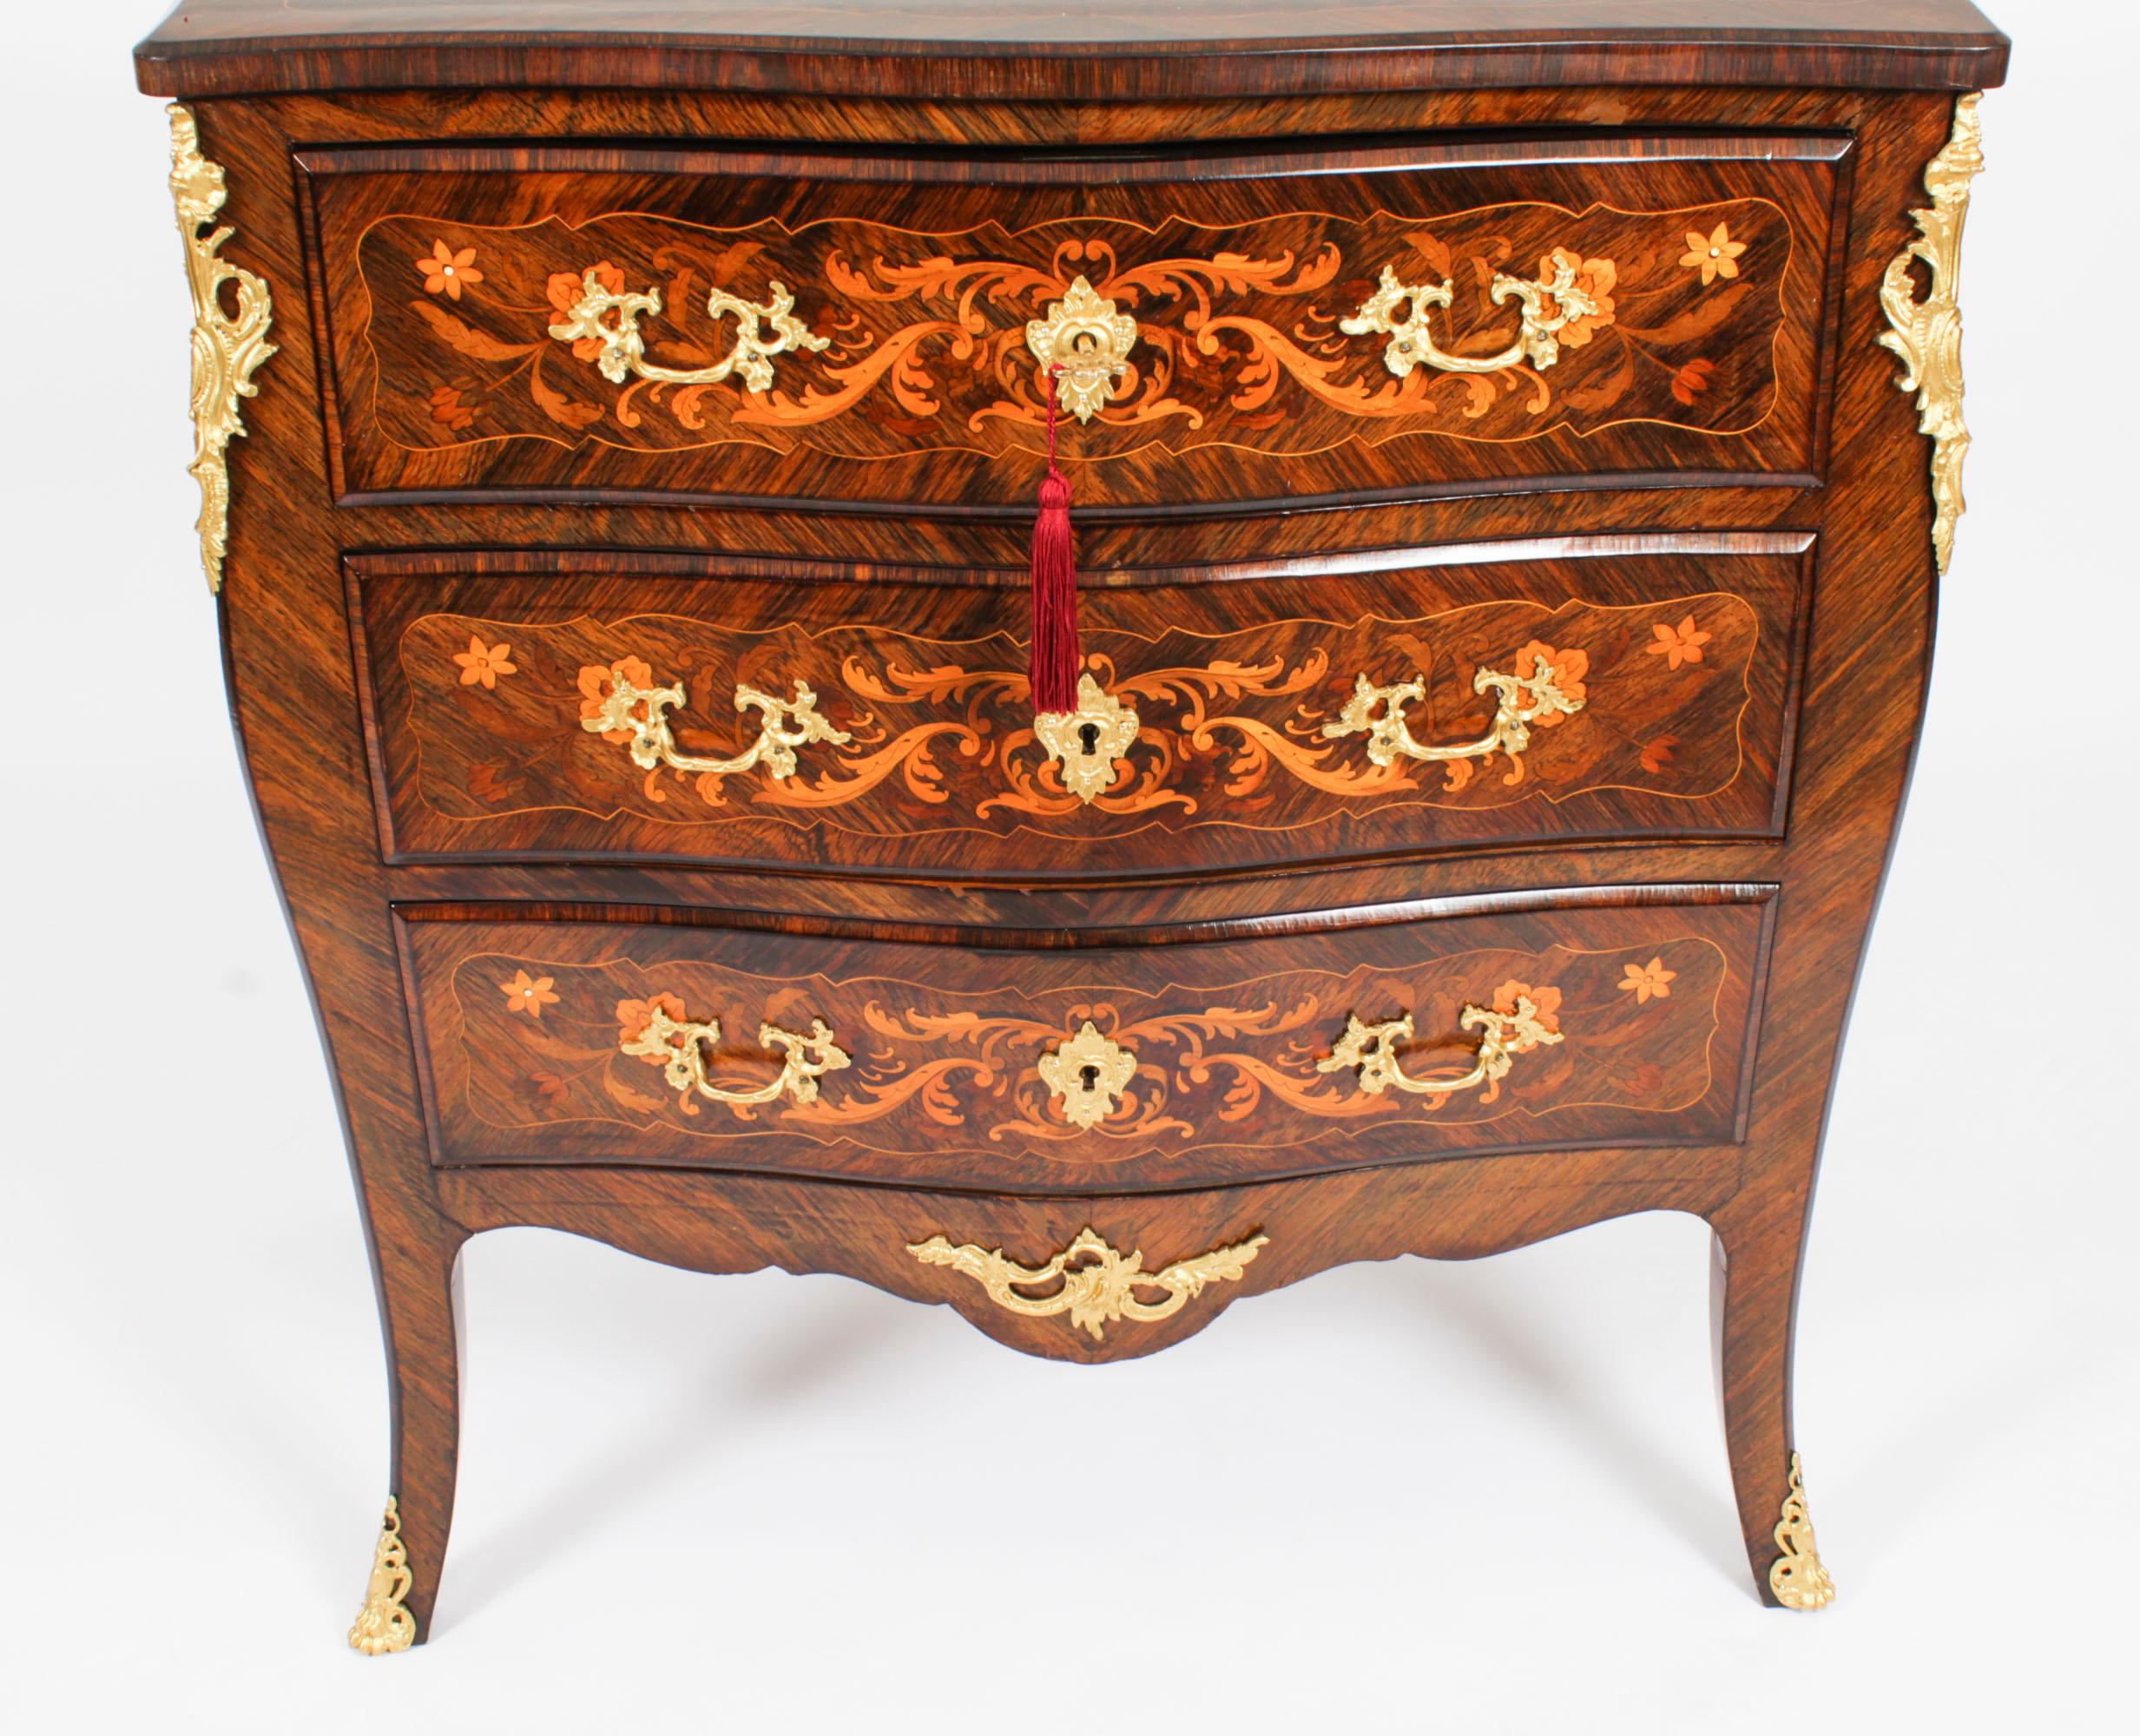 Antique French Louis Revival Marquetry Commode Chest of Drawers 19th Century In Good Condition For Sale In London, GB